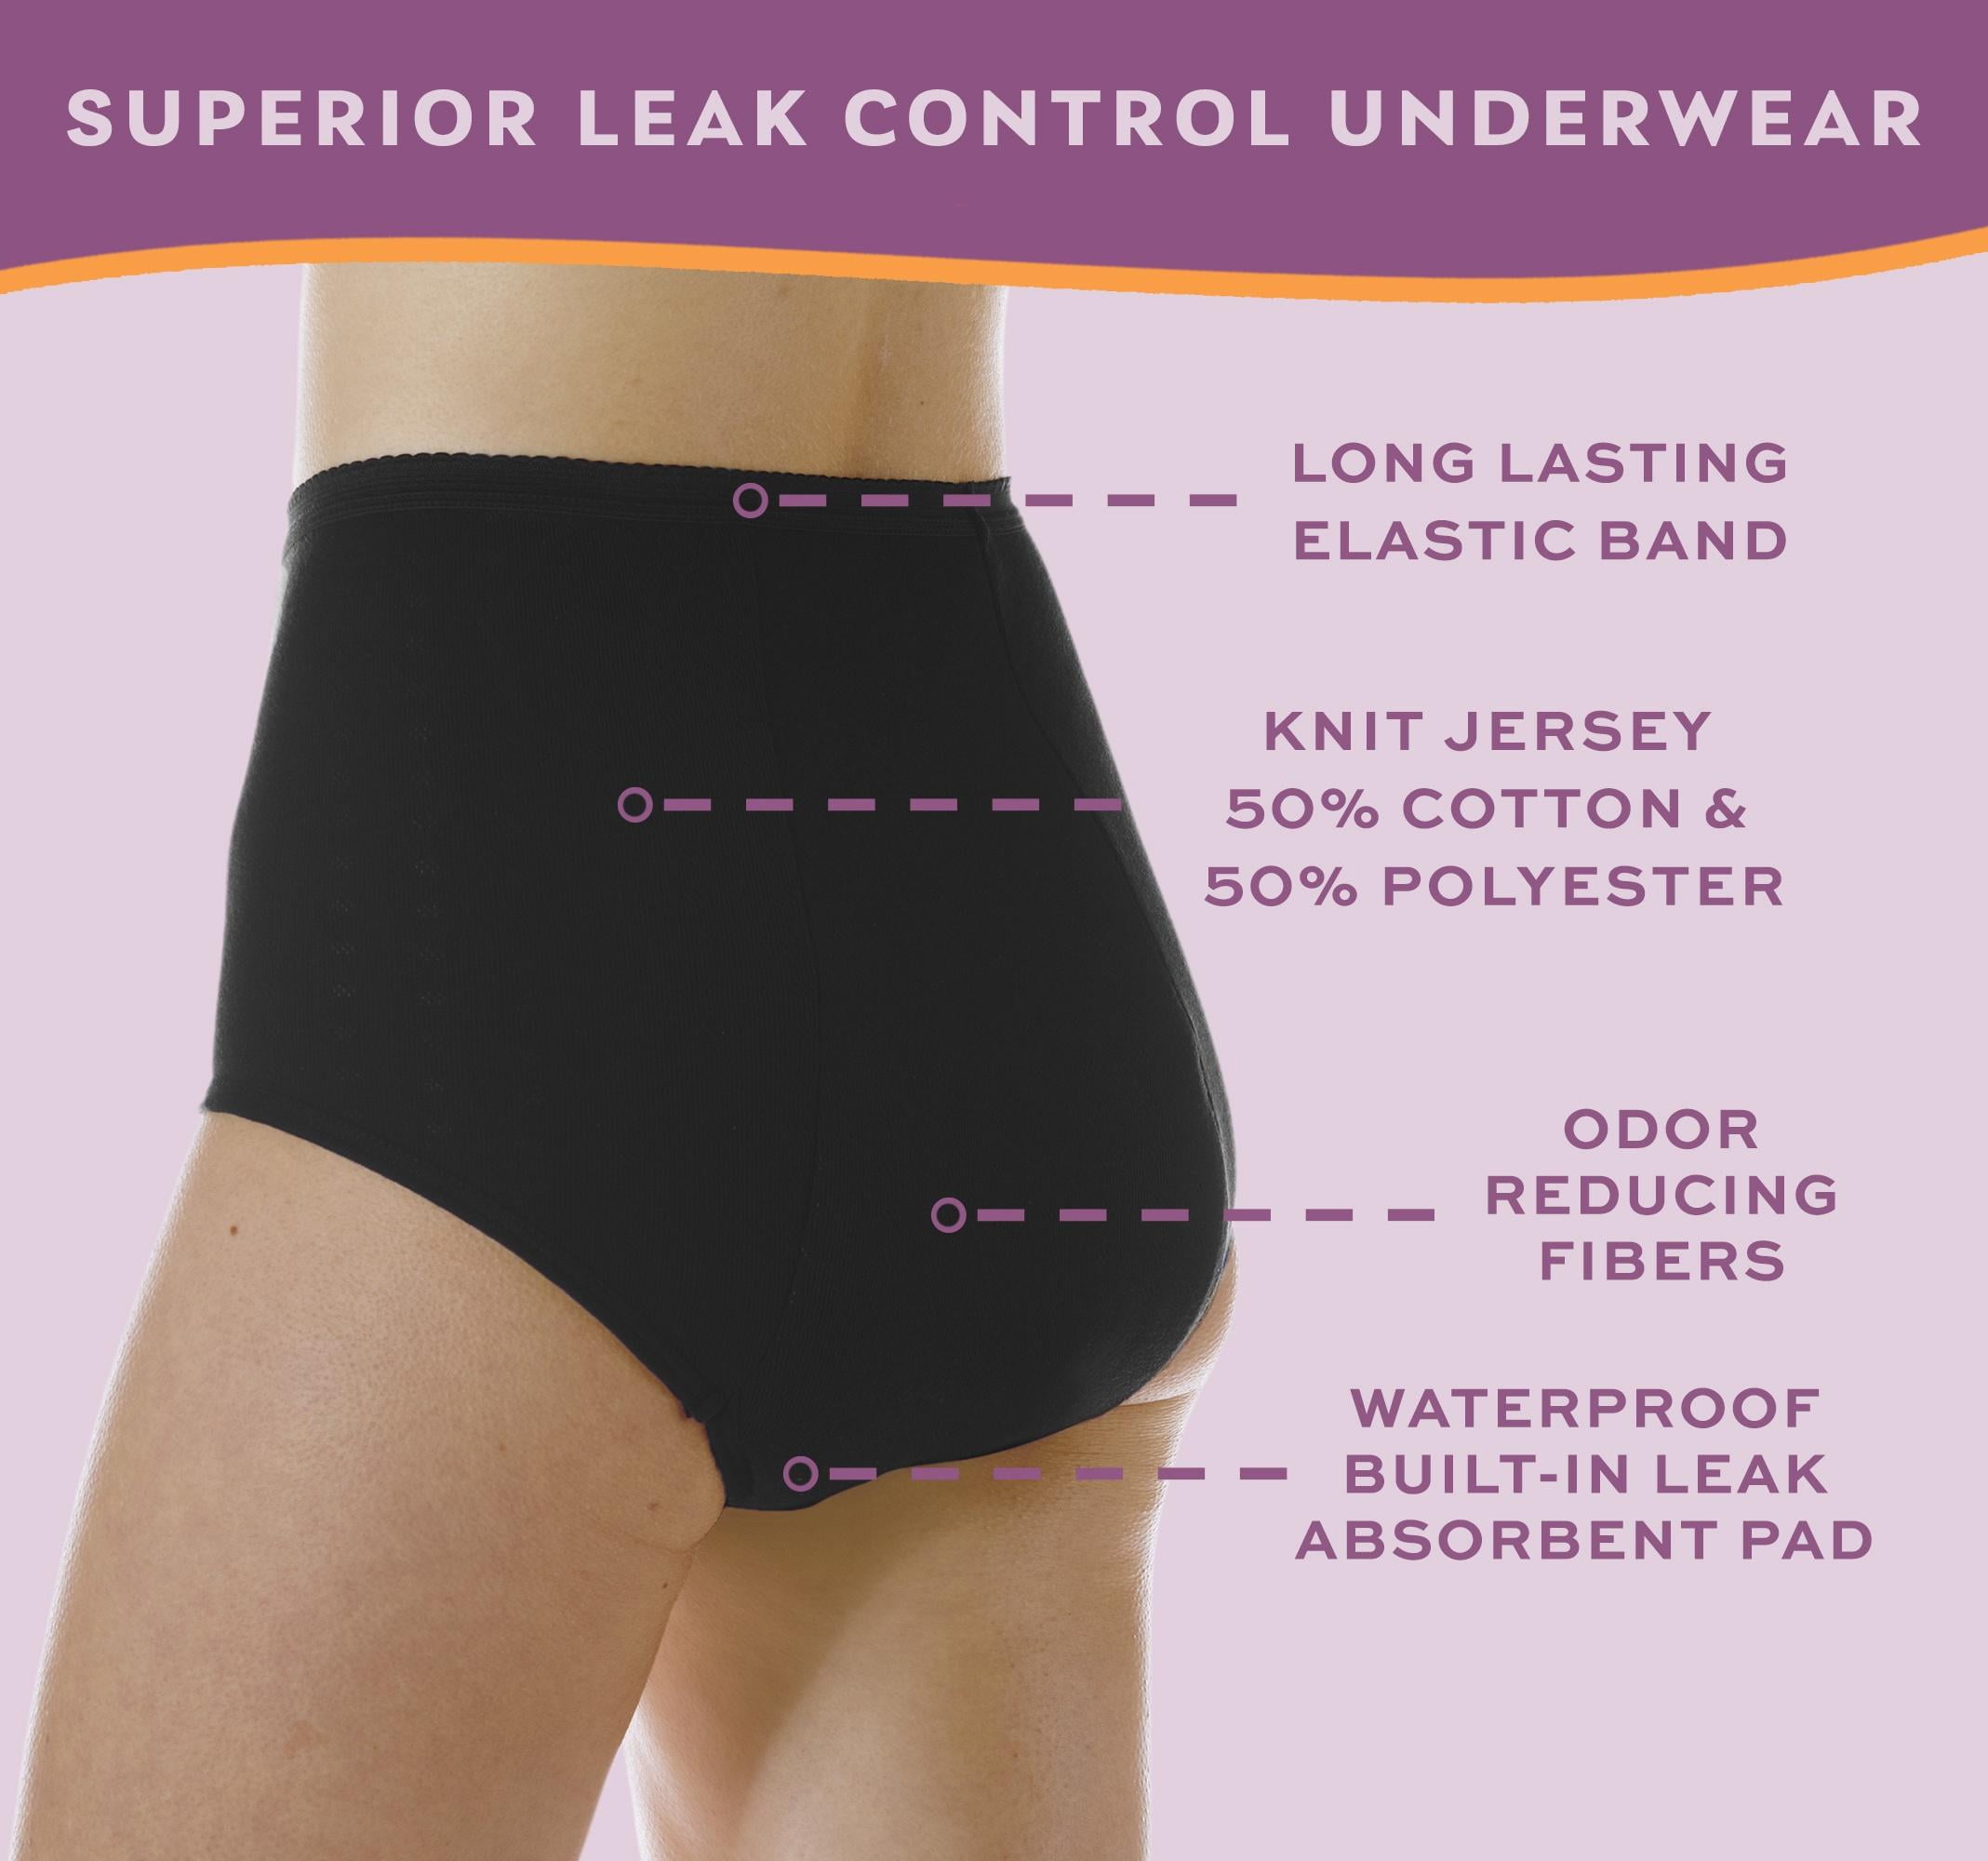 Beware of the Spanx! Control underwear can crush your organs and trigger  incontinence, experts warn